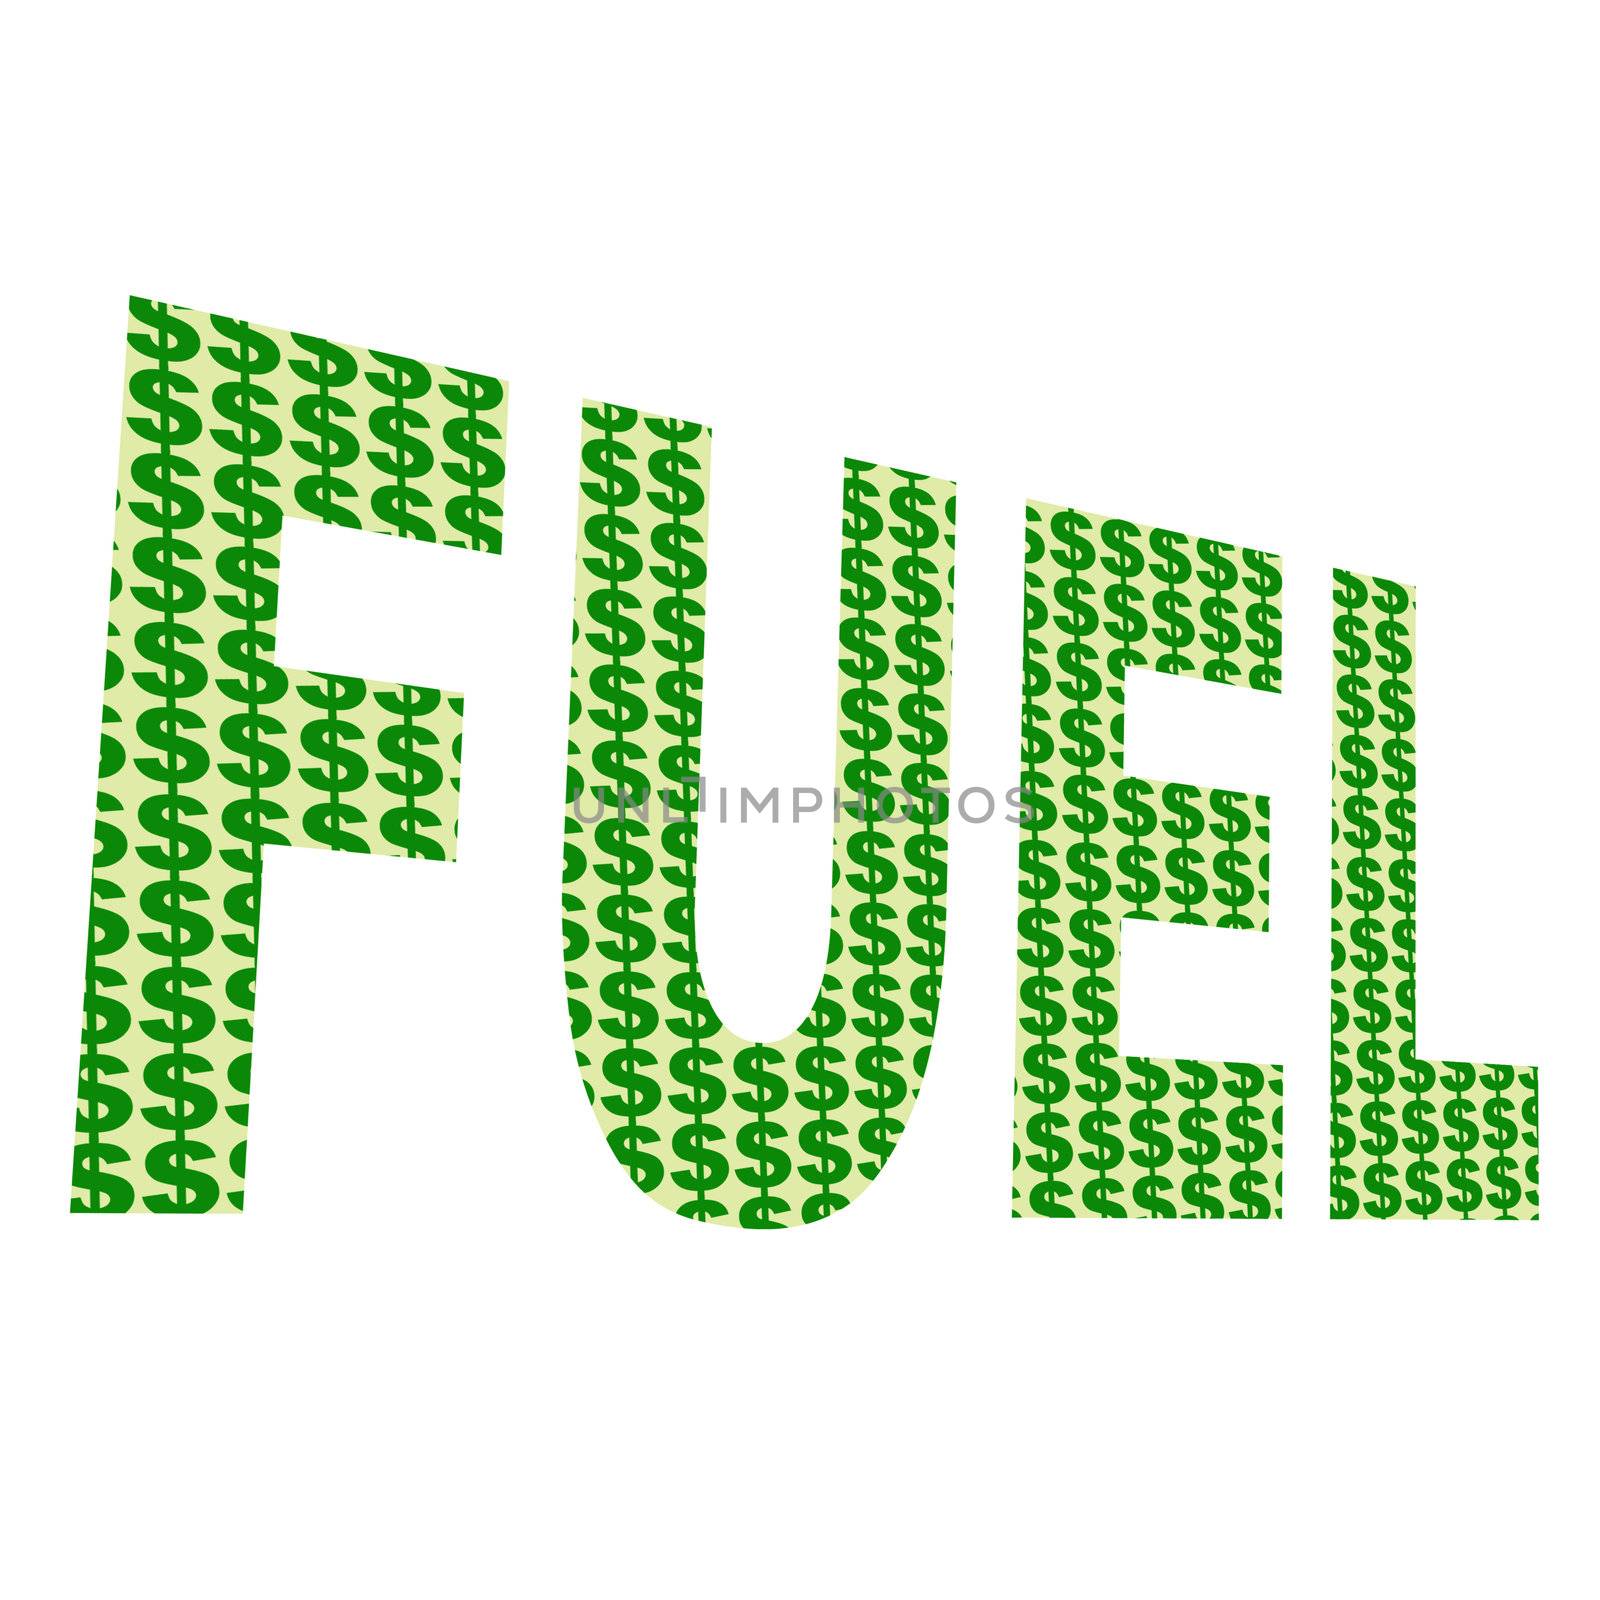 Fuel Ilustration by graficallyminded